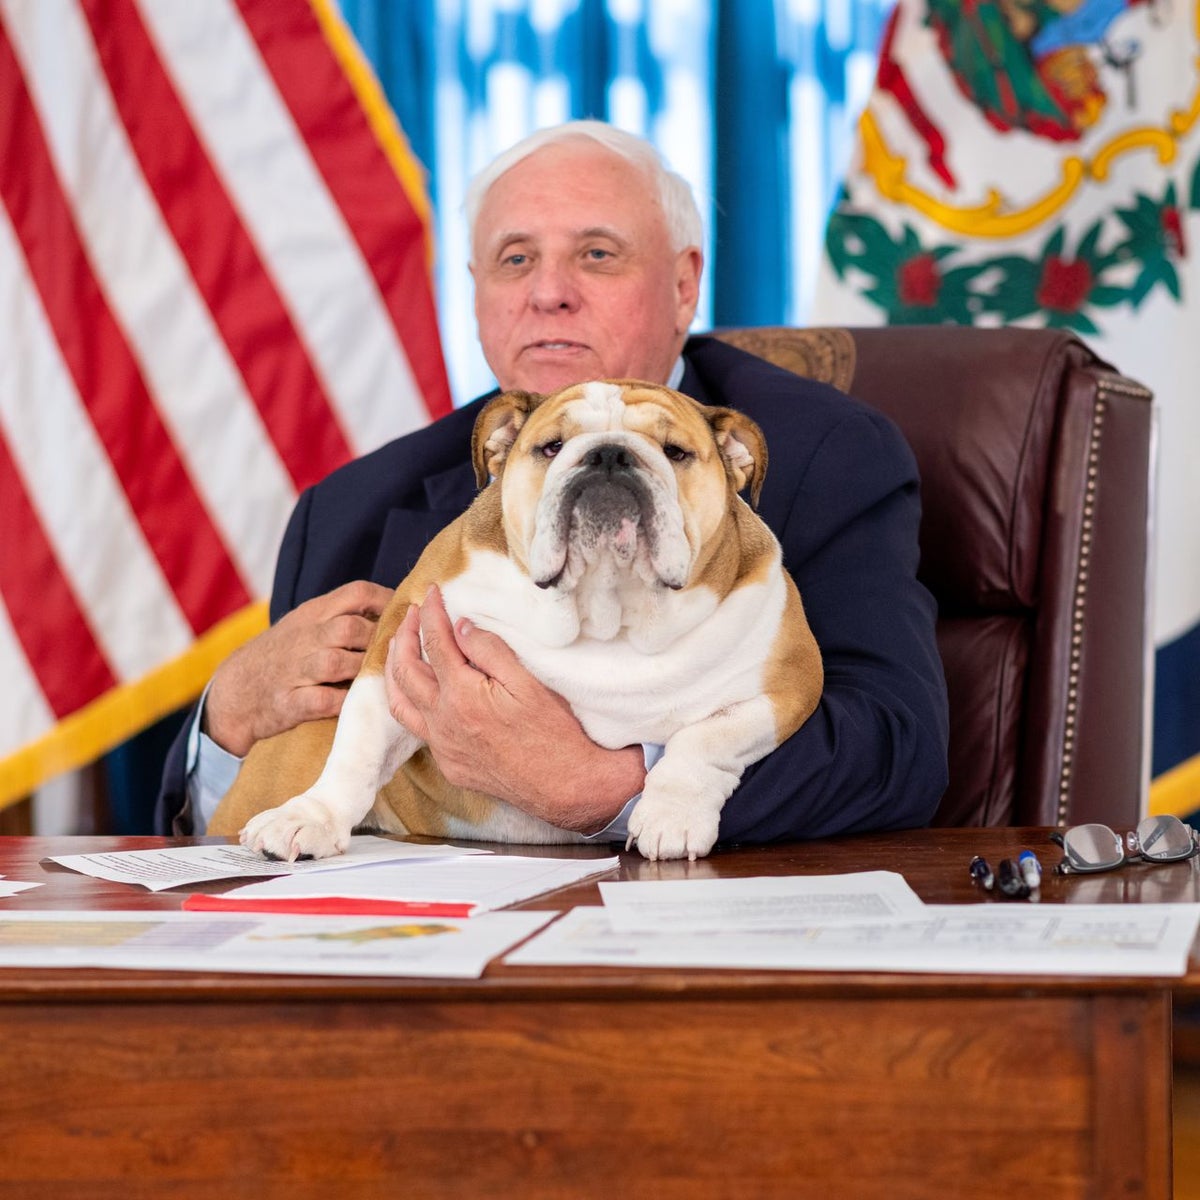 Voices: Babydog Justice is the RNC speaker you didn’t expect